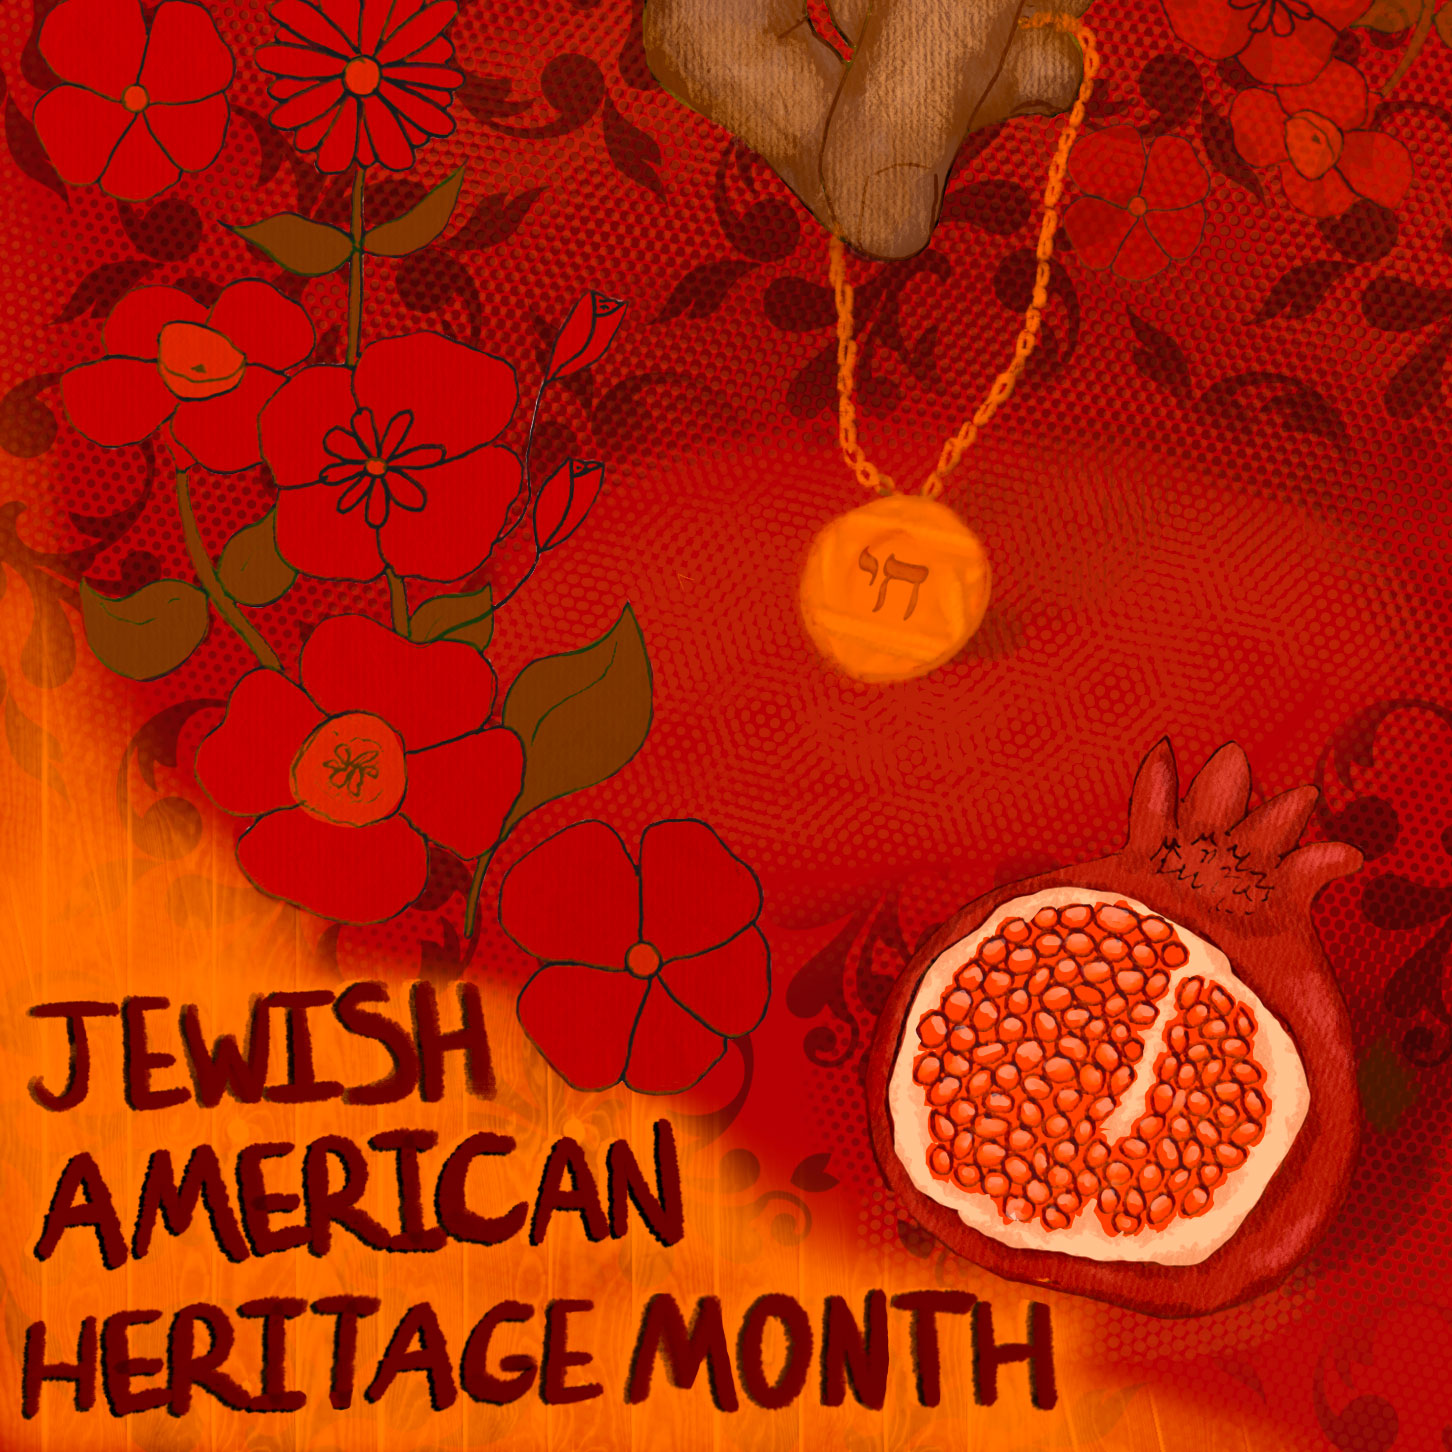 digital painting of a hand holding necklace above a pomegranate with 'Jewish American Heritage Month' brush script and red flowers